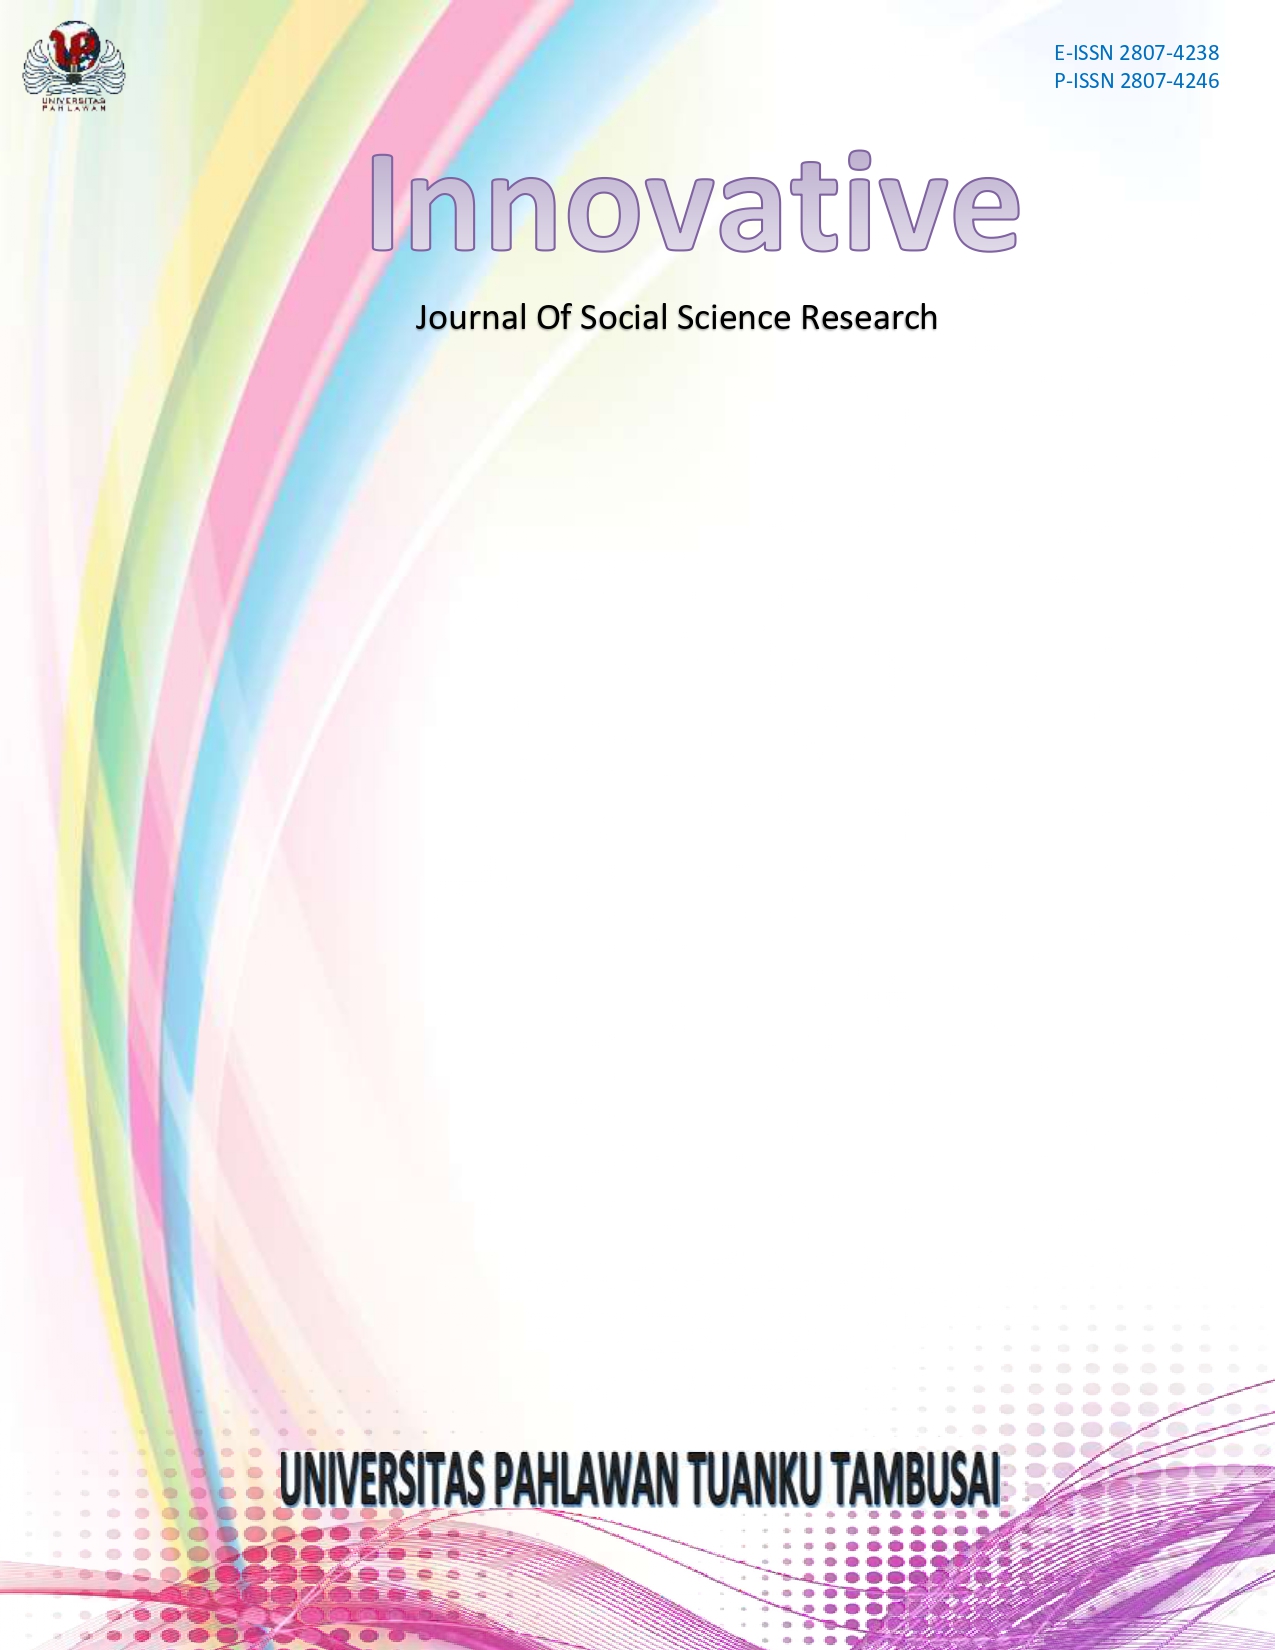 					View Vol. 2 No. 1 (2022): Innovative: Journal Of Social Science Research
				